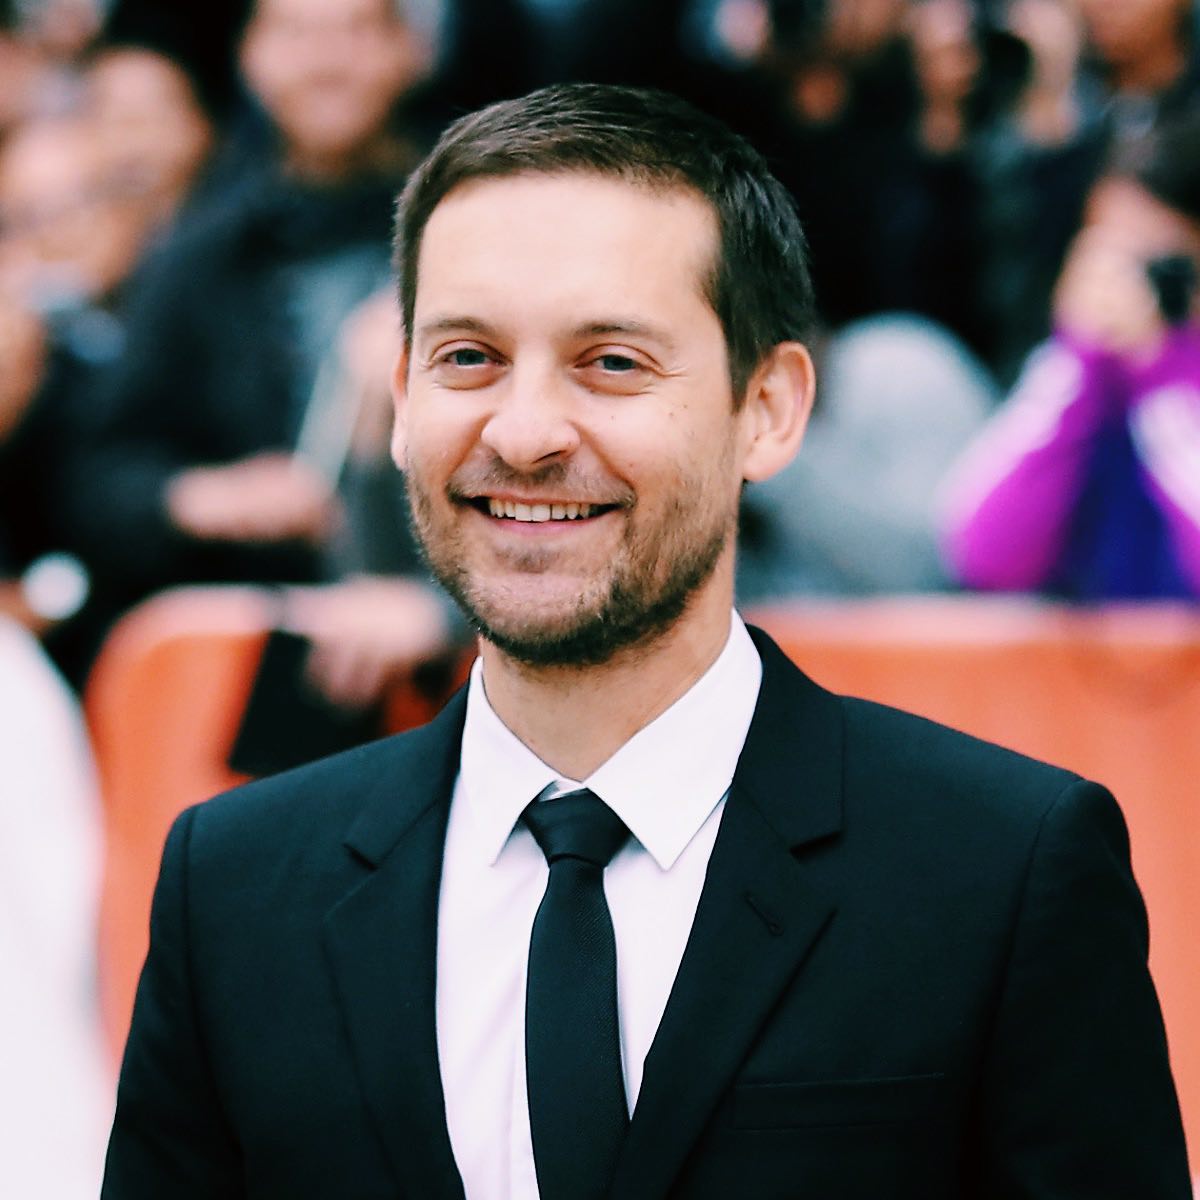 Tobey Maguire Biography: Movies, Net Worth, Age, Wife, Brother, Instagram, Children